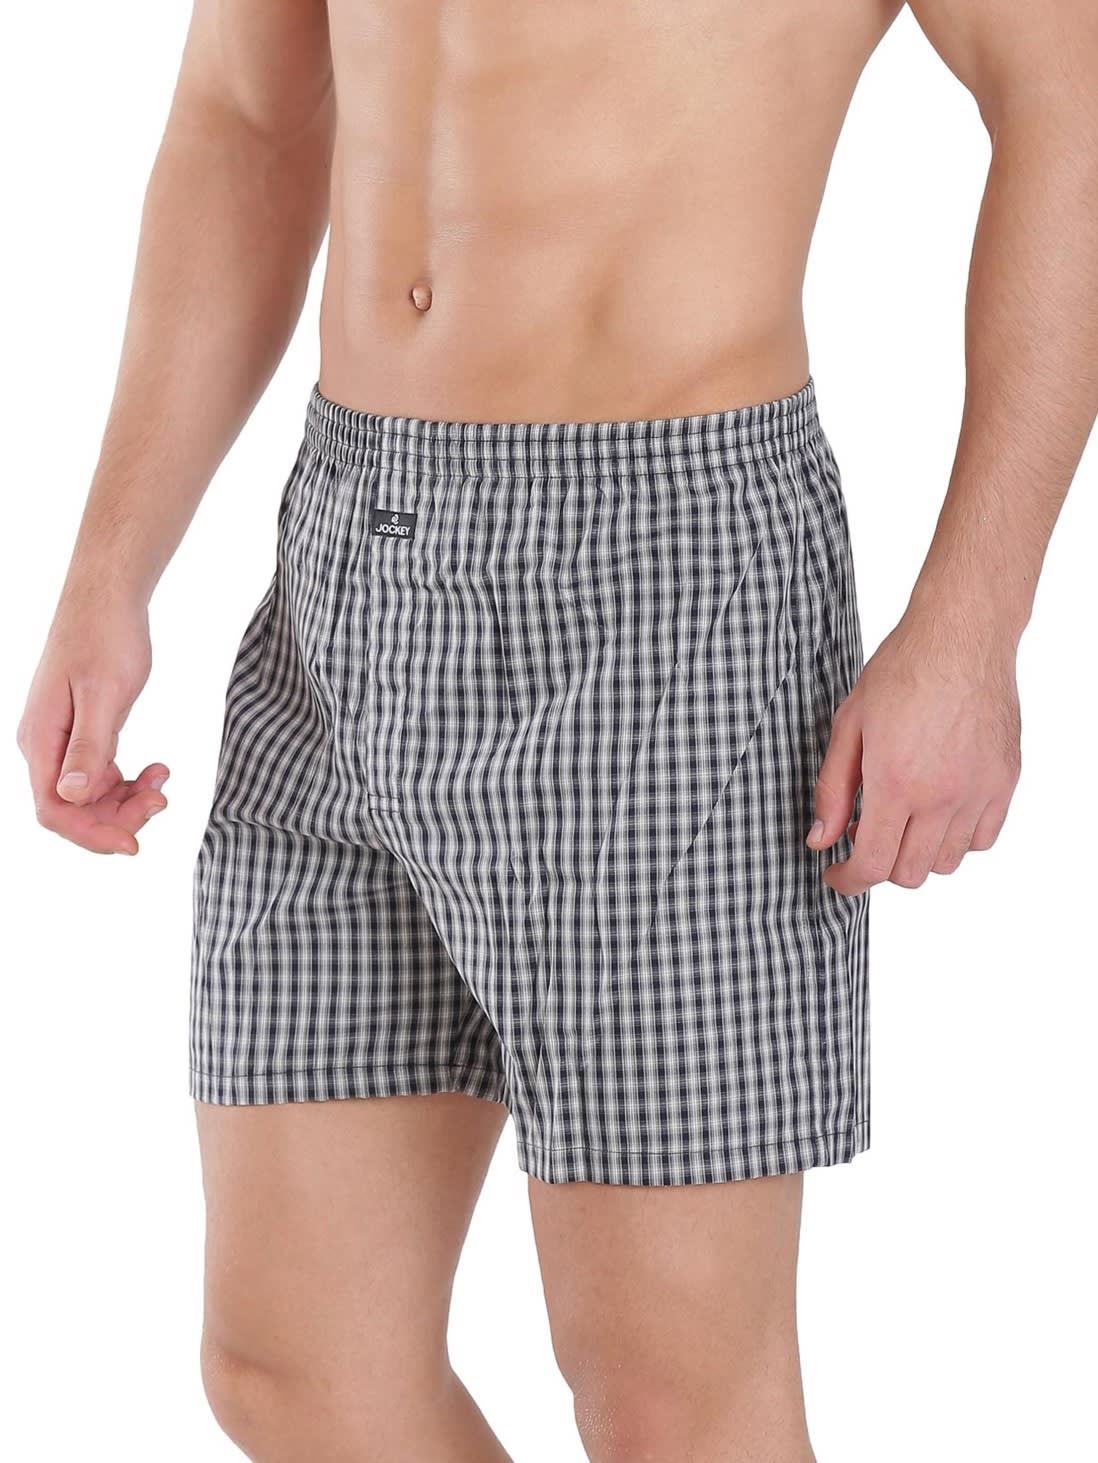 Jockey Light Assorted Checks Boxer Shorts Pack of 2 - Style Number ...